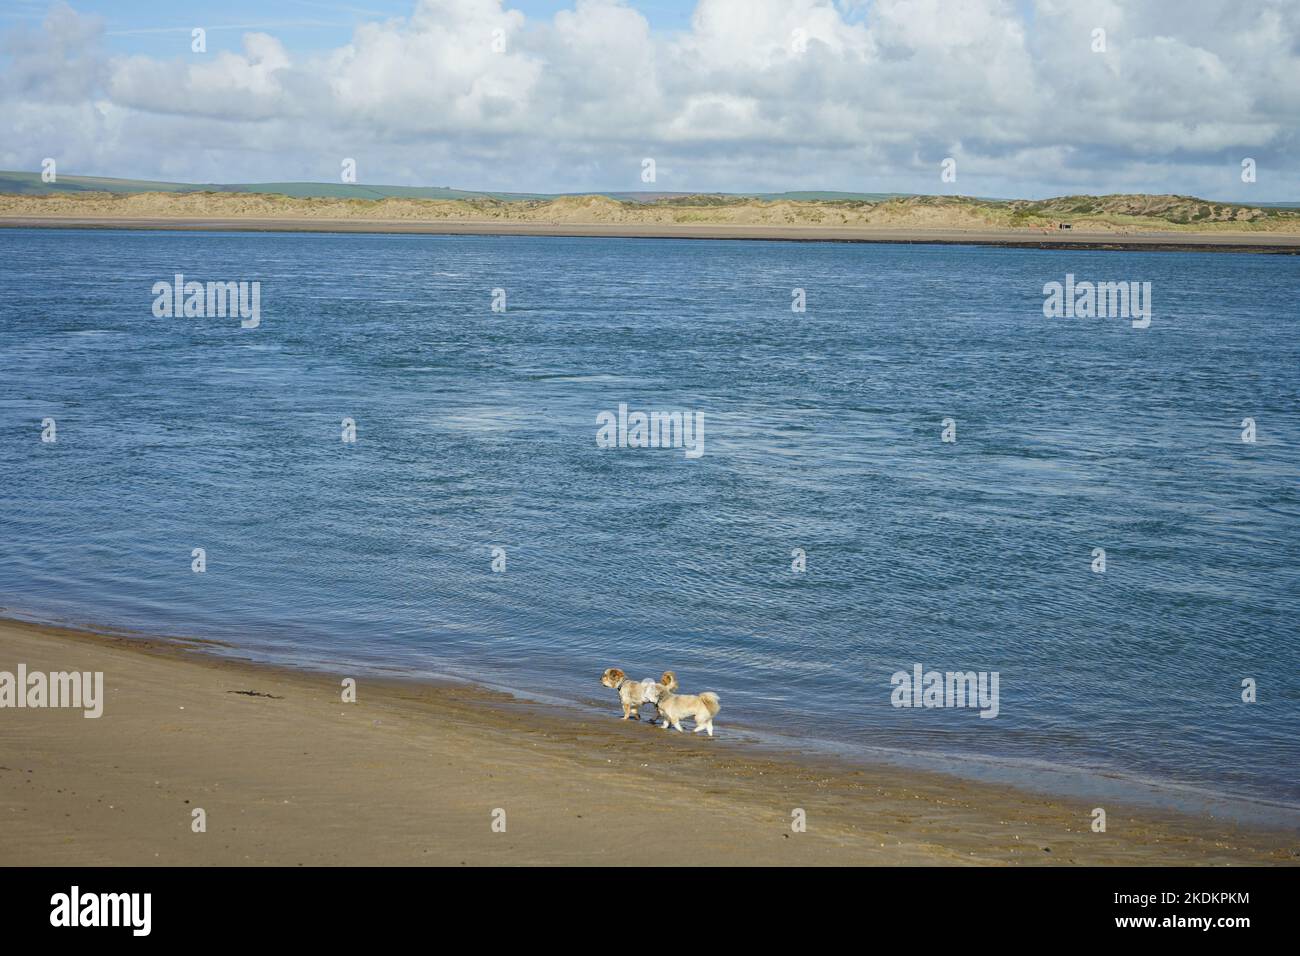 Two dogs on the beach Stock Photo